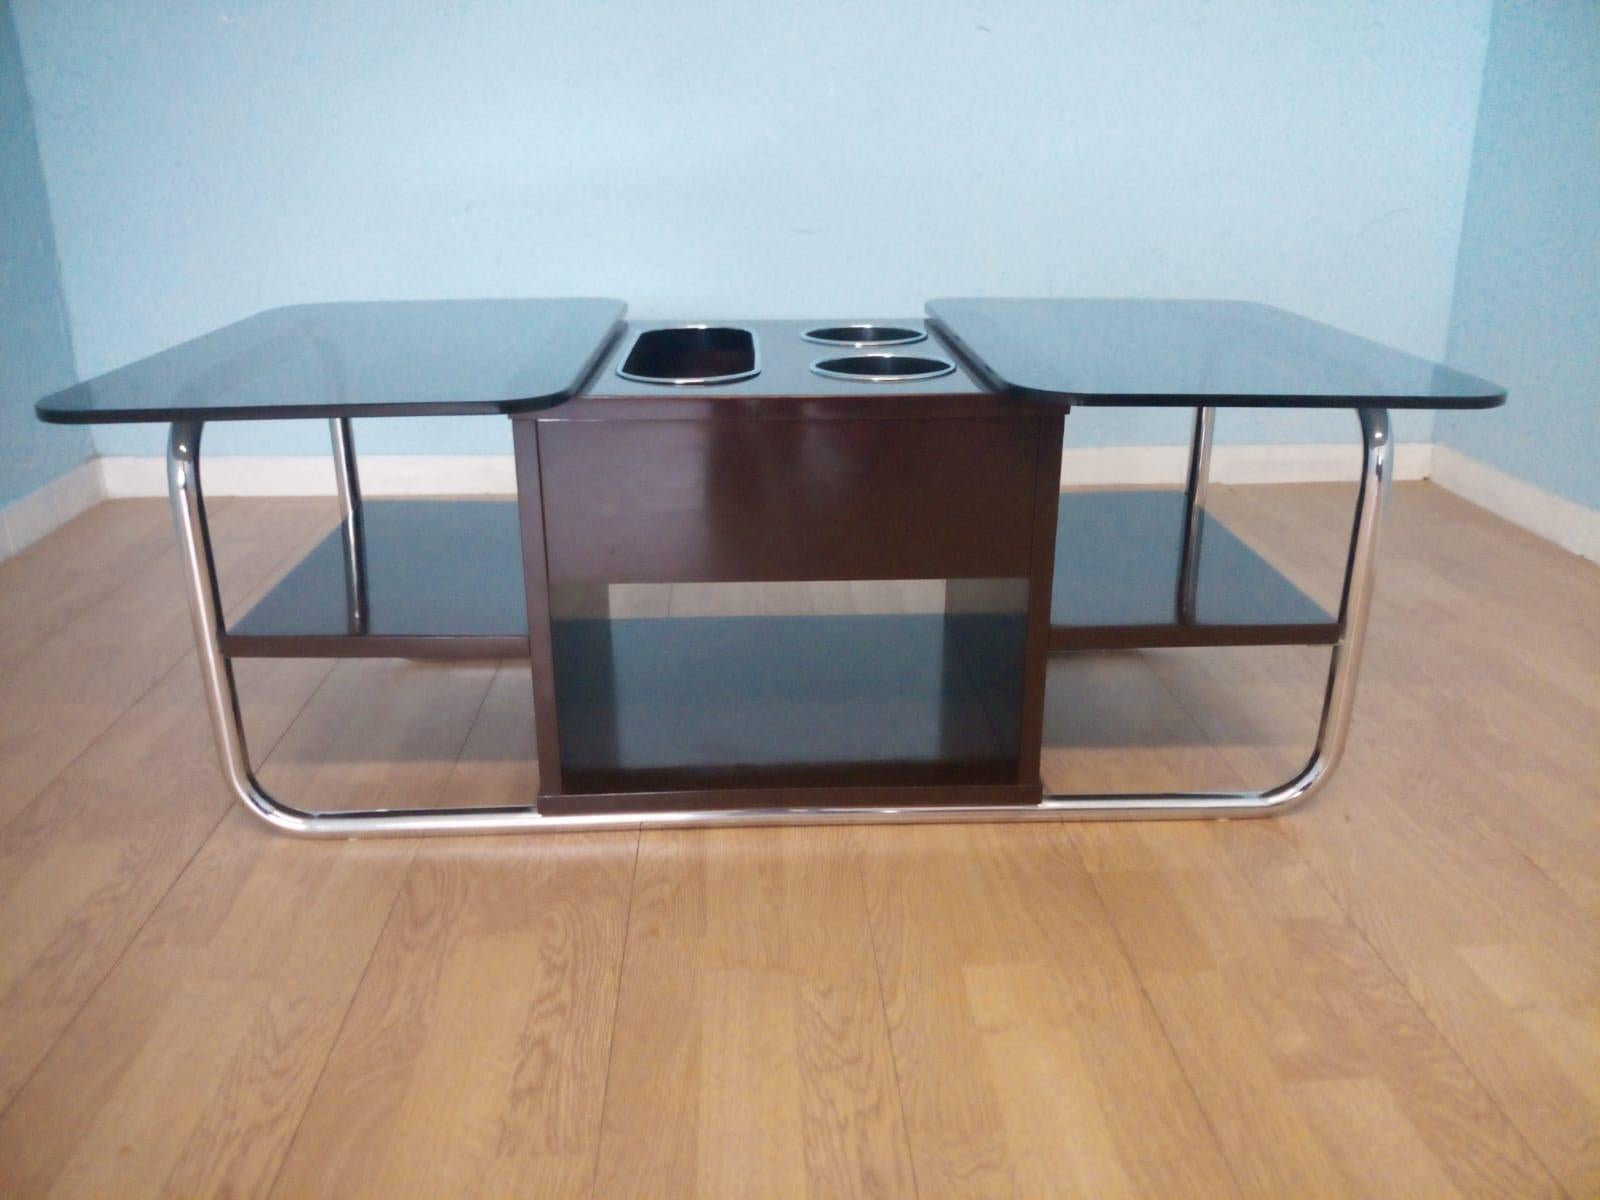 Crystal Chrome & Smoked Glass Coffee Table, 1970s Bar Table Design Vintage Industrial For Sale